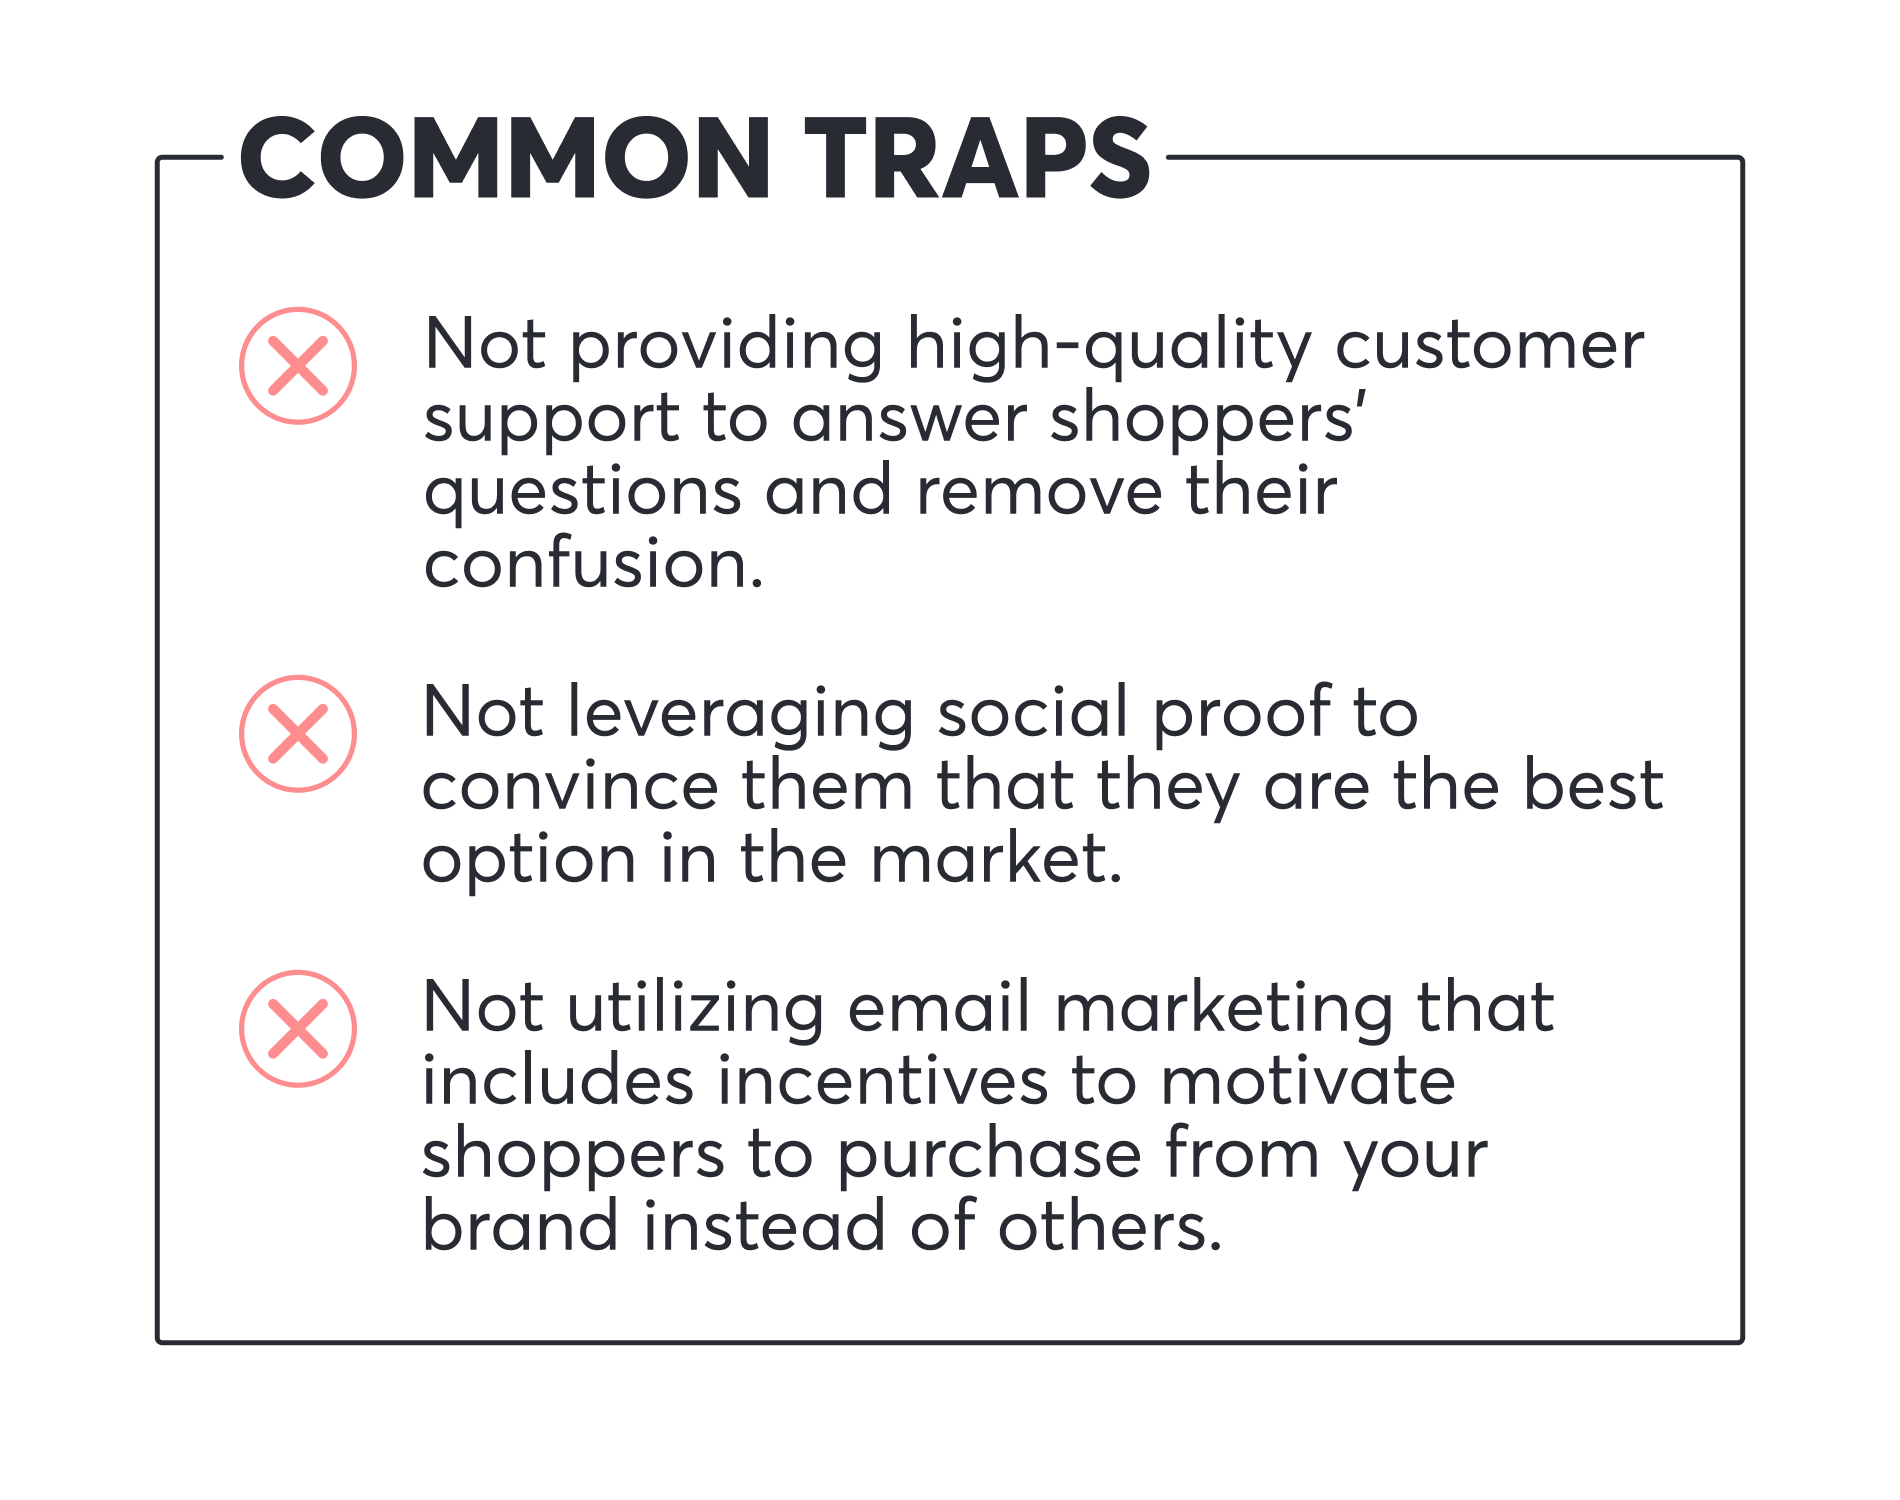 Common Traps to Optimize the Consideration Stage of the Shopify Funnel